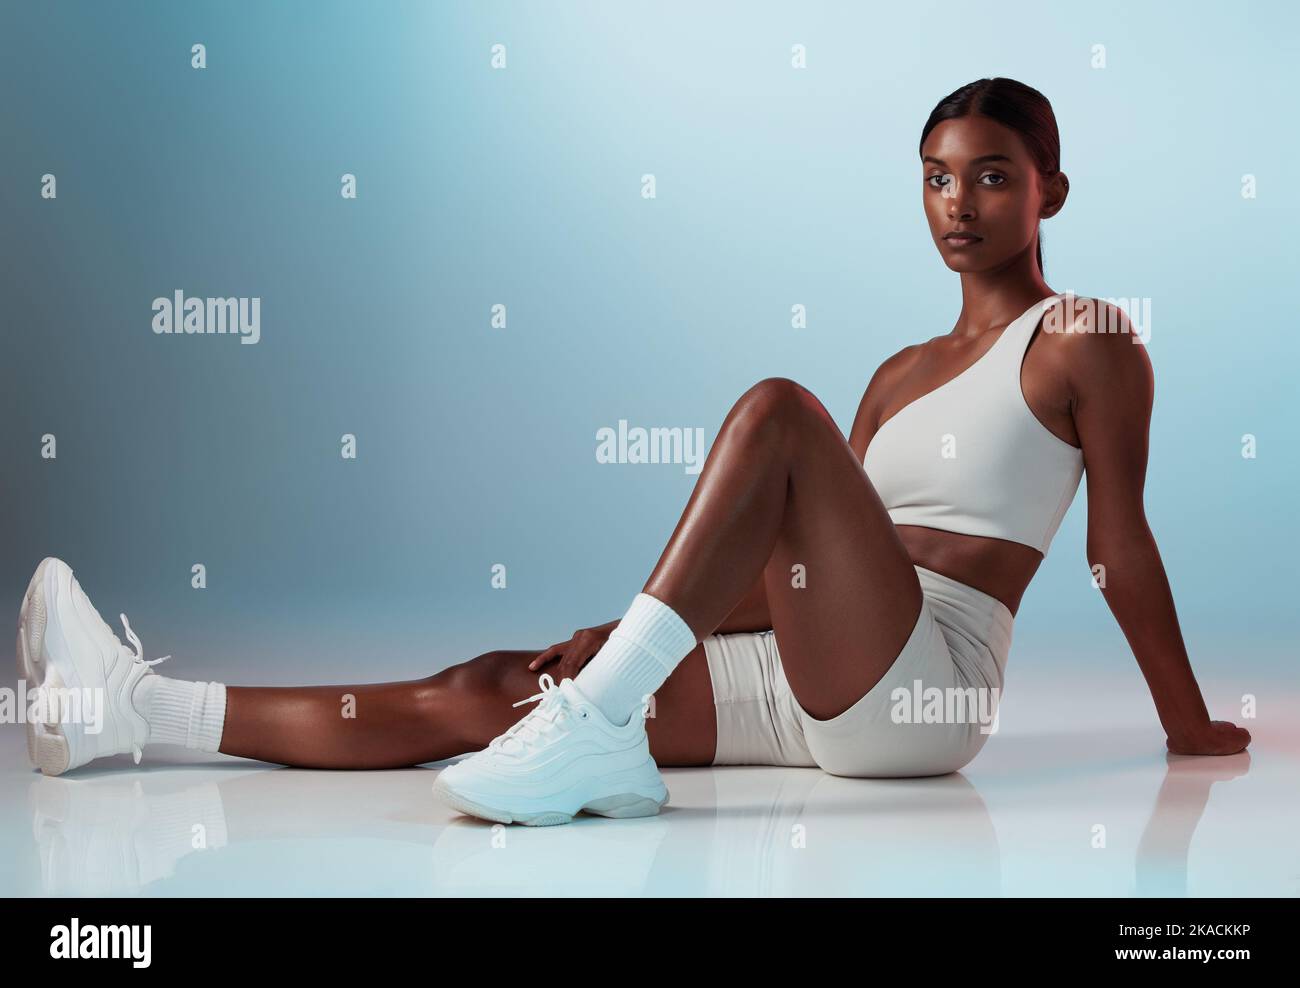 Fitness, woman and portrait in studio for health, exercise and body goals against a blue background mockup. Floor, workout and indian girl model with Stock Photo